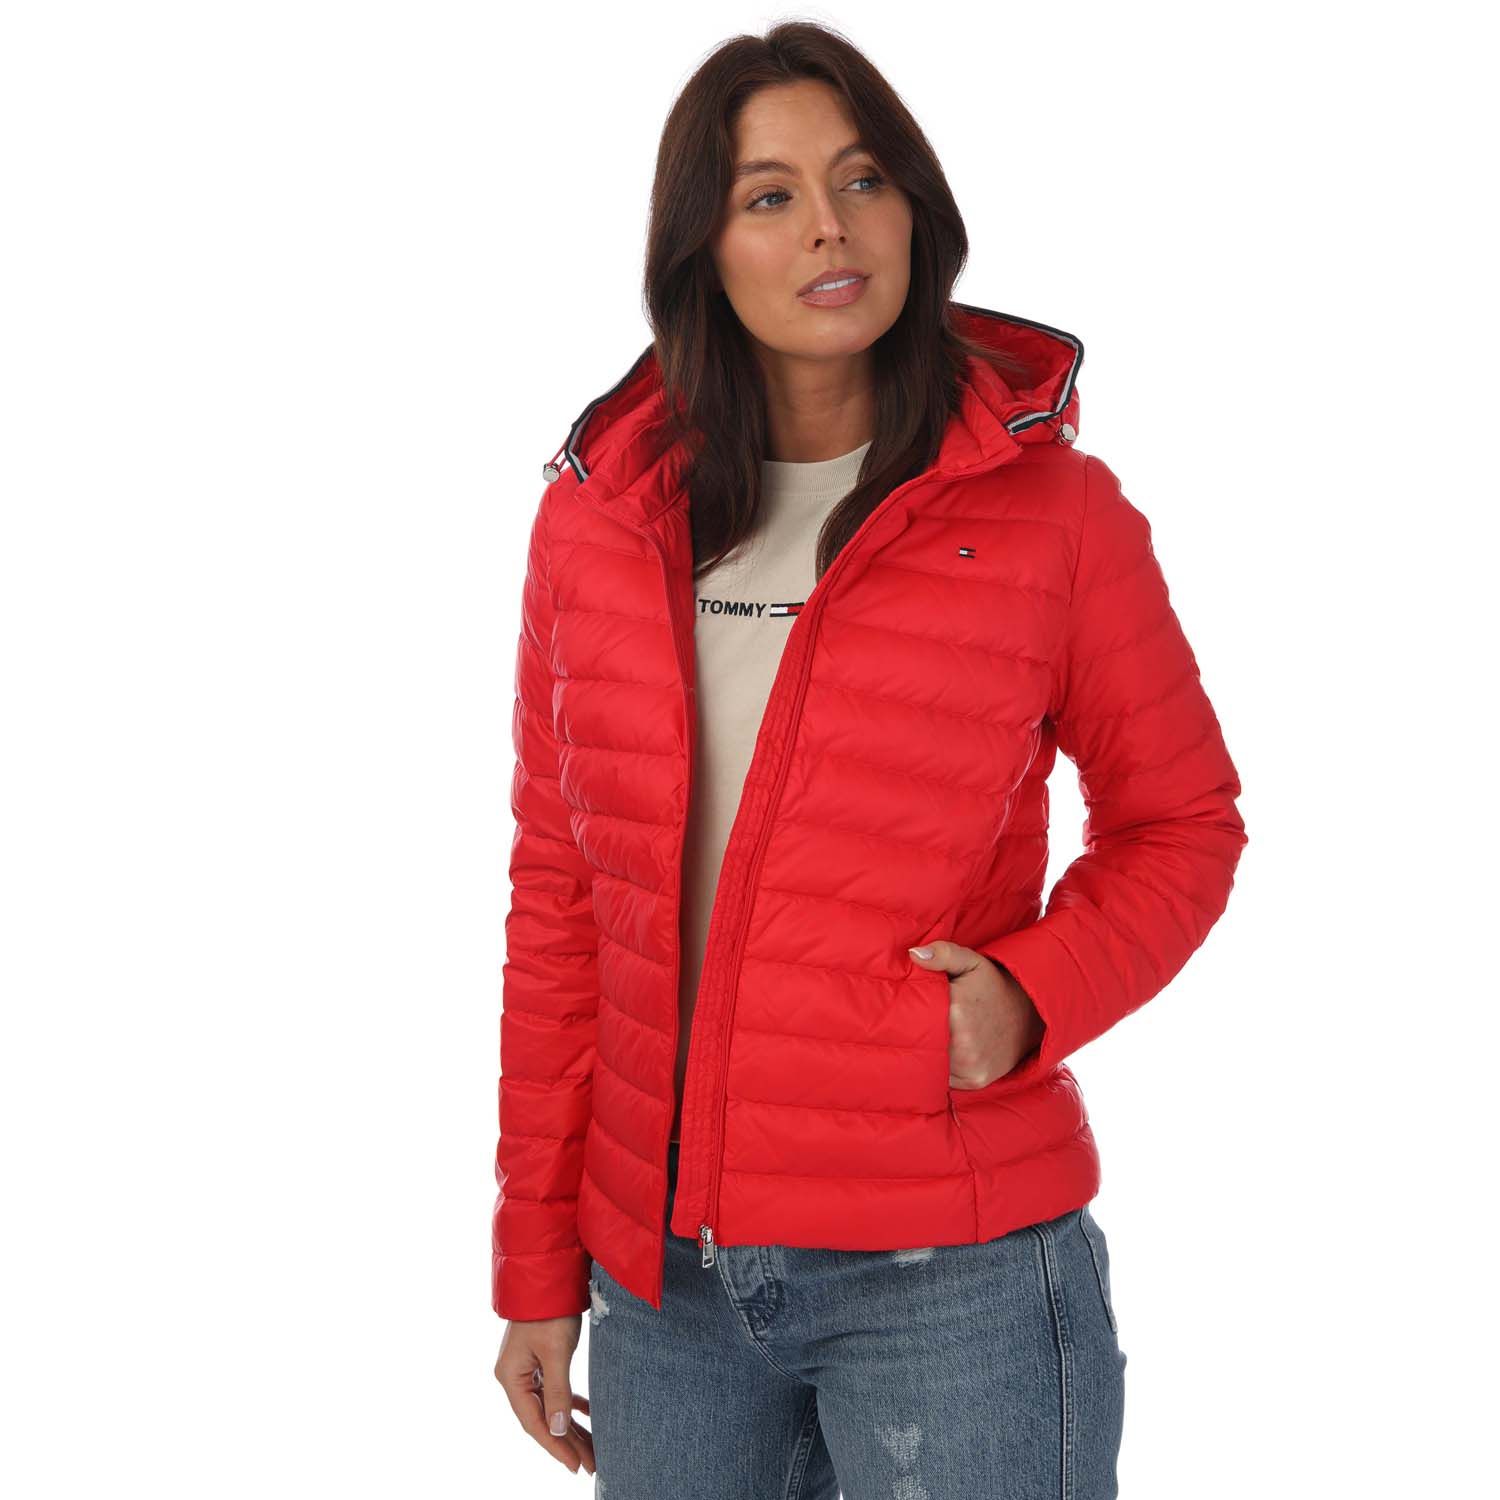 Red Tommy Lightweight Down Jacket - Get The Label